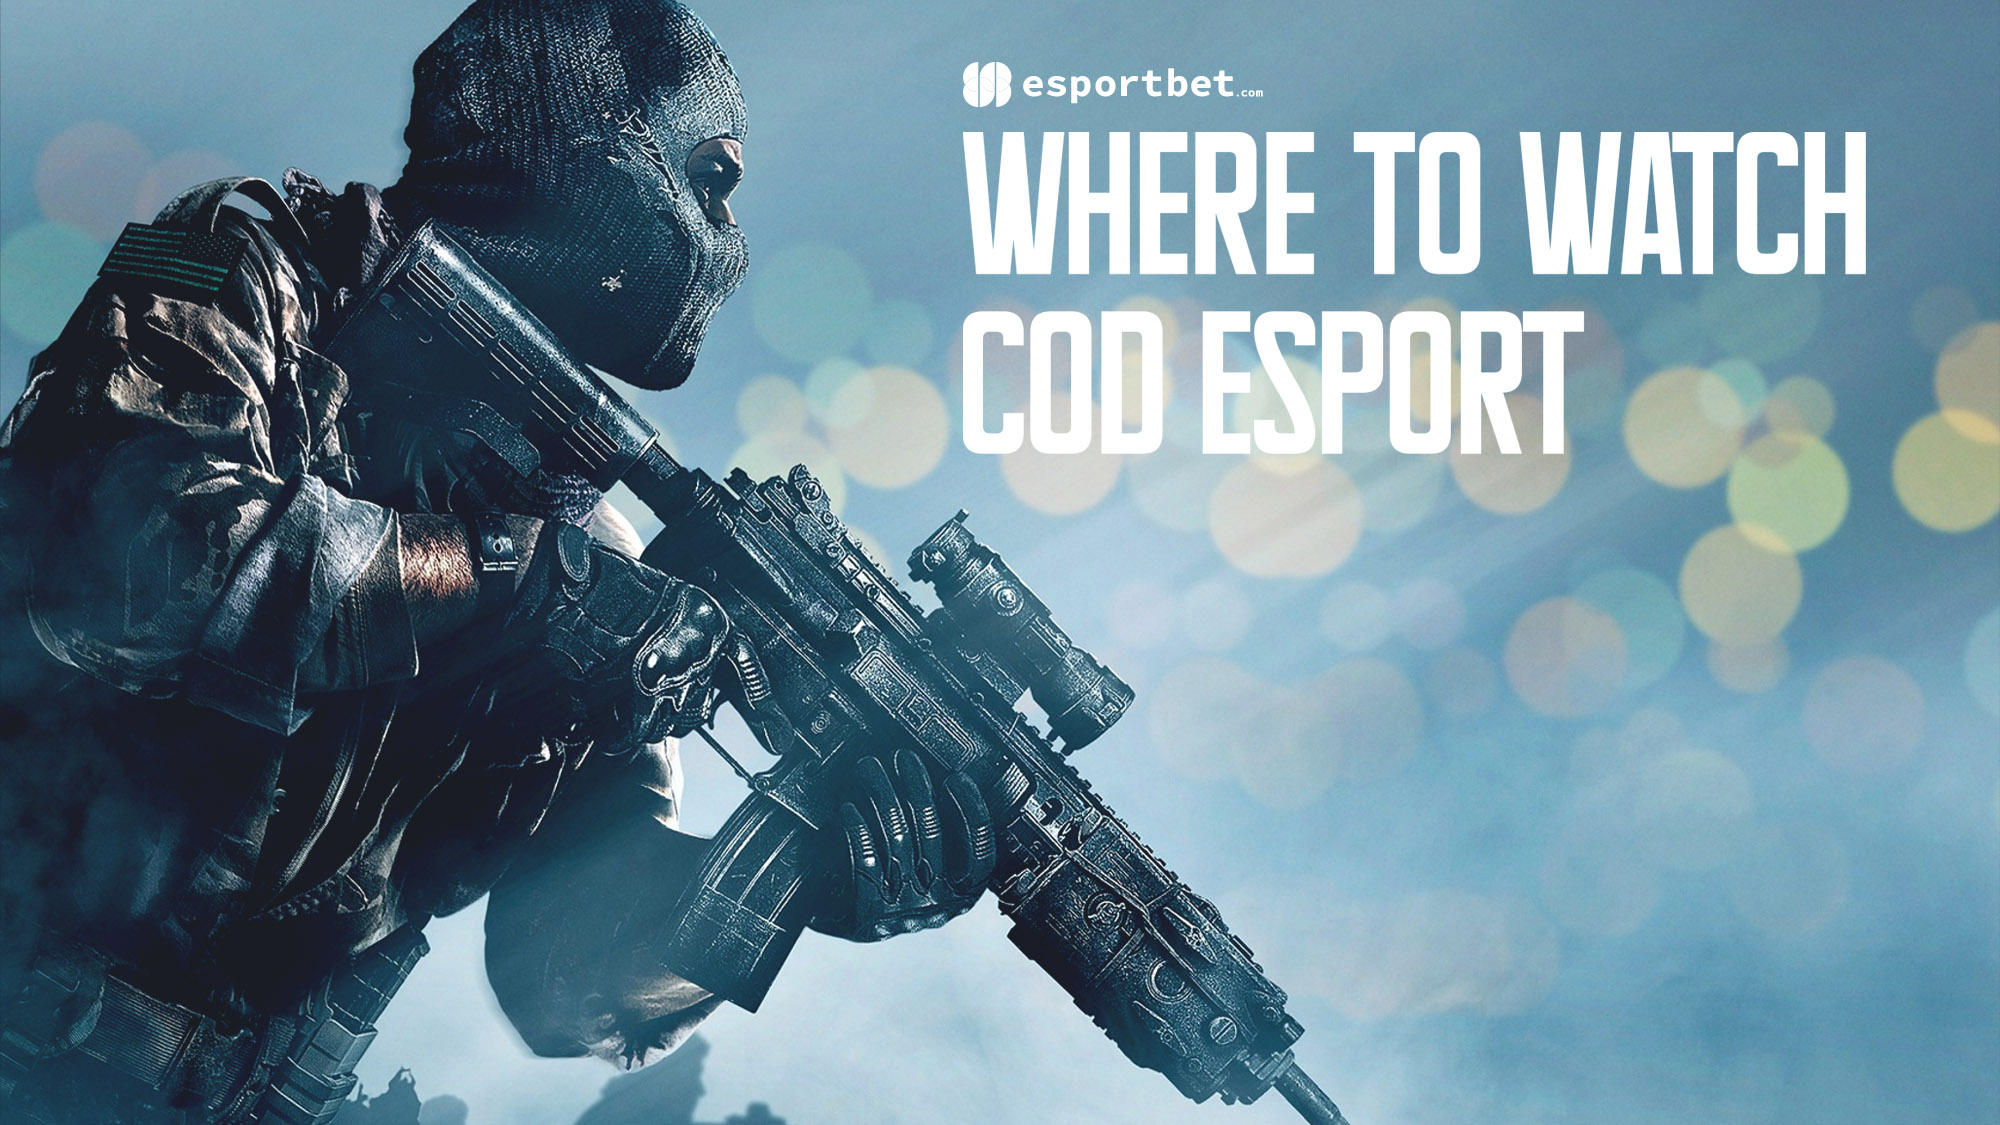 How to watch Call of Duty esports online